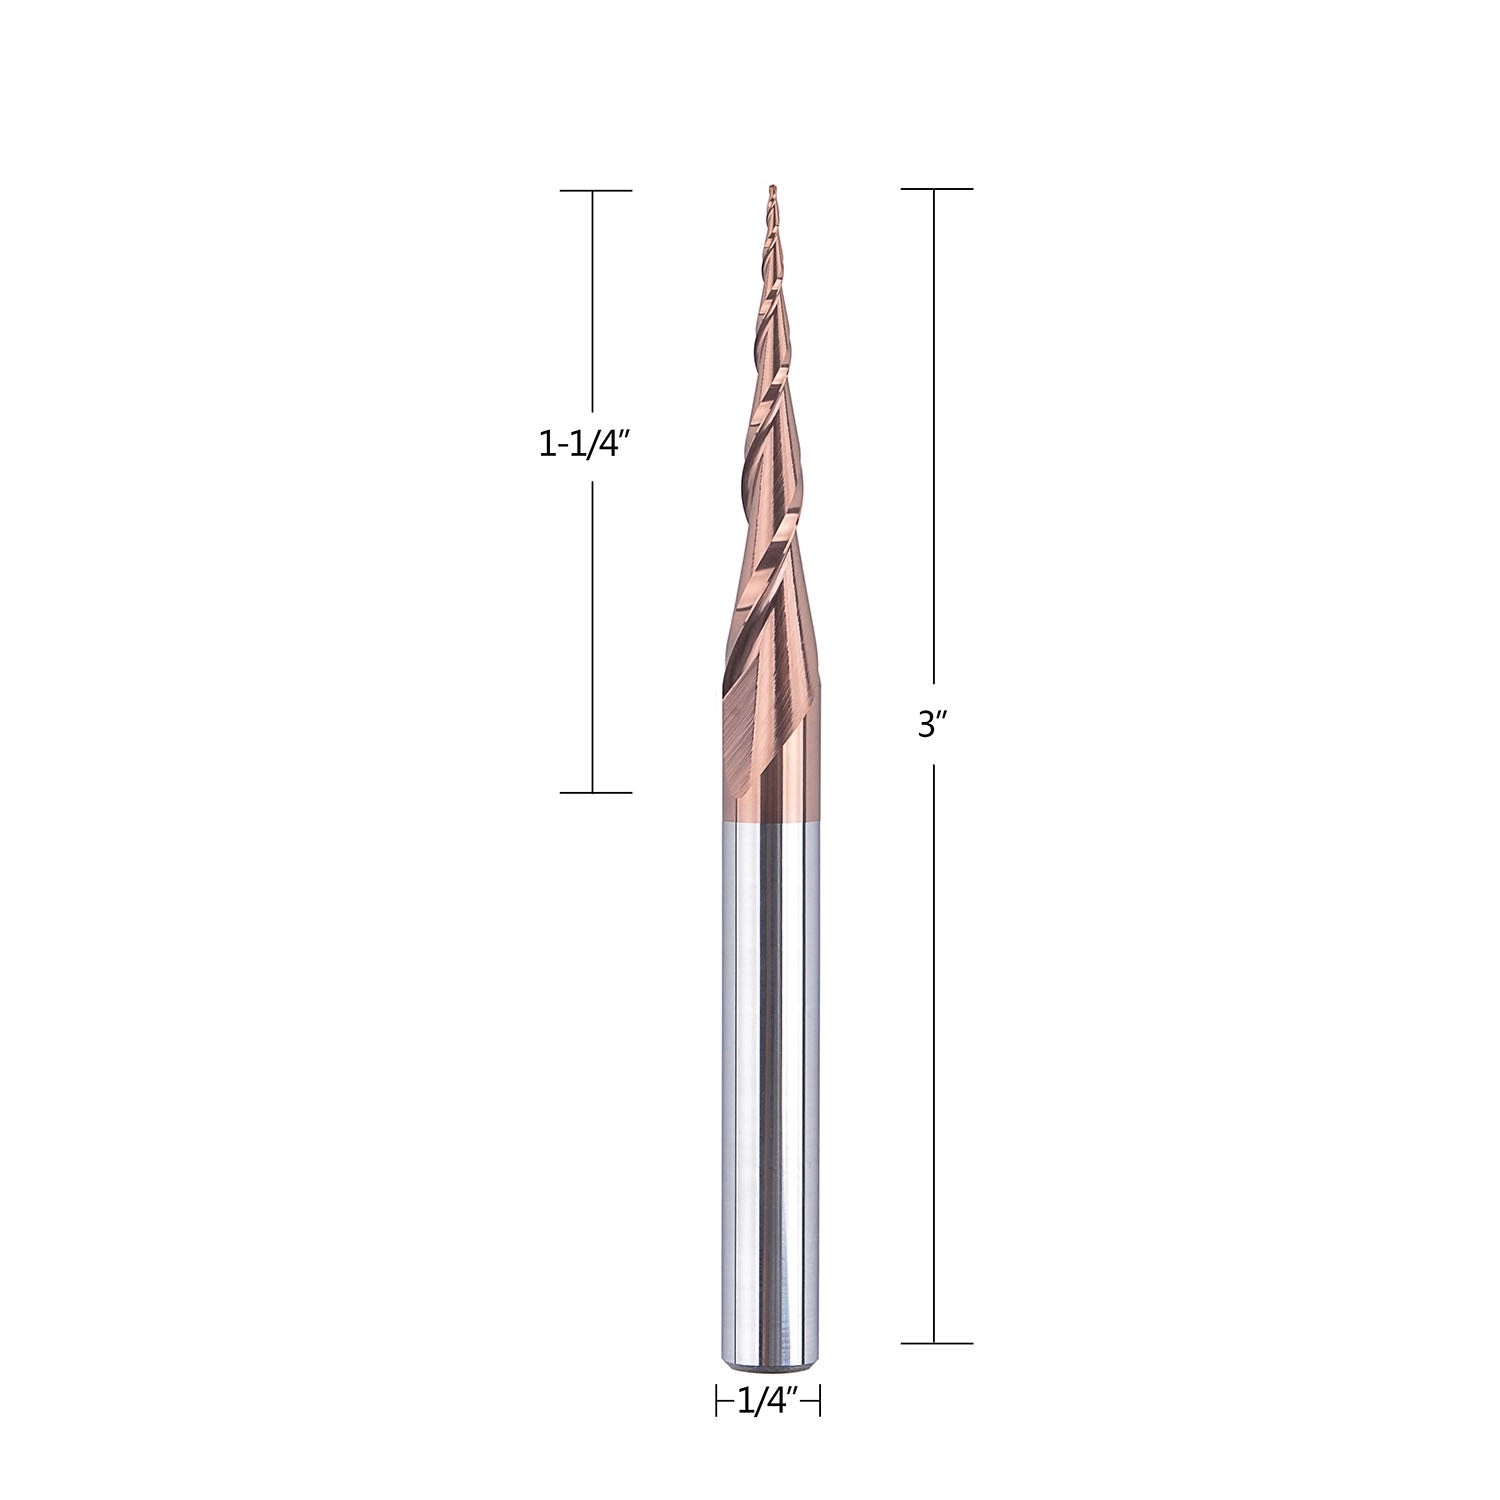 SpeTool CA W01005 CNC 2D and 3D Carving 5.26 Deg Tapered Angle Ball Nose 0.25mm Radius x 1/4" Shank x 1-1/4" Cutting Length x 3" Long 2 Flute SC H-Si Coated Upcut Router Bit